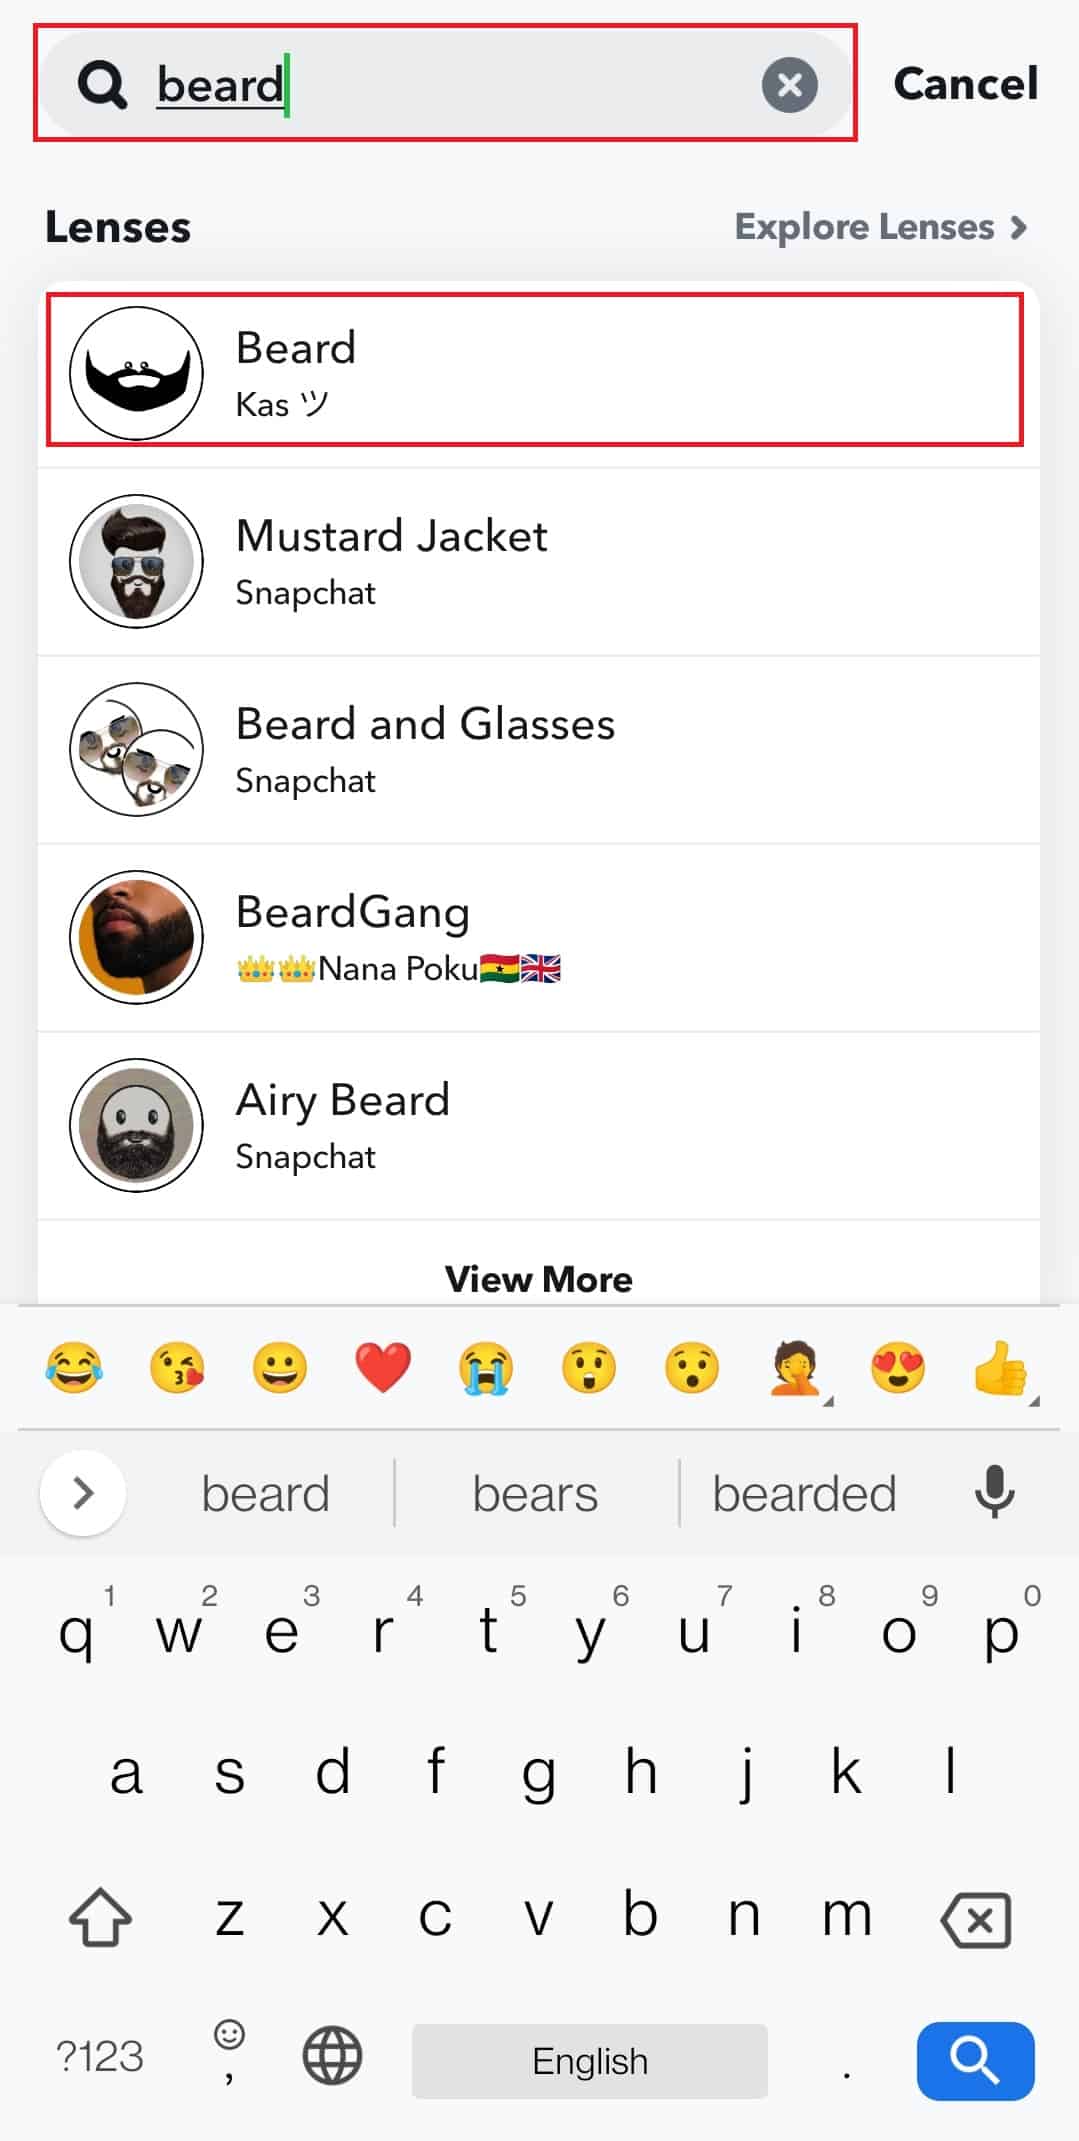 Search for the beard filter and tap on it | beardless filter TikTok